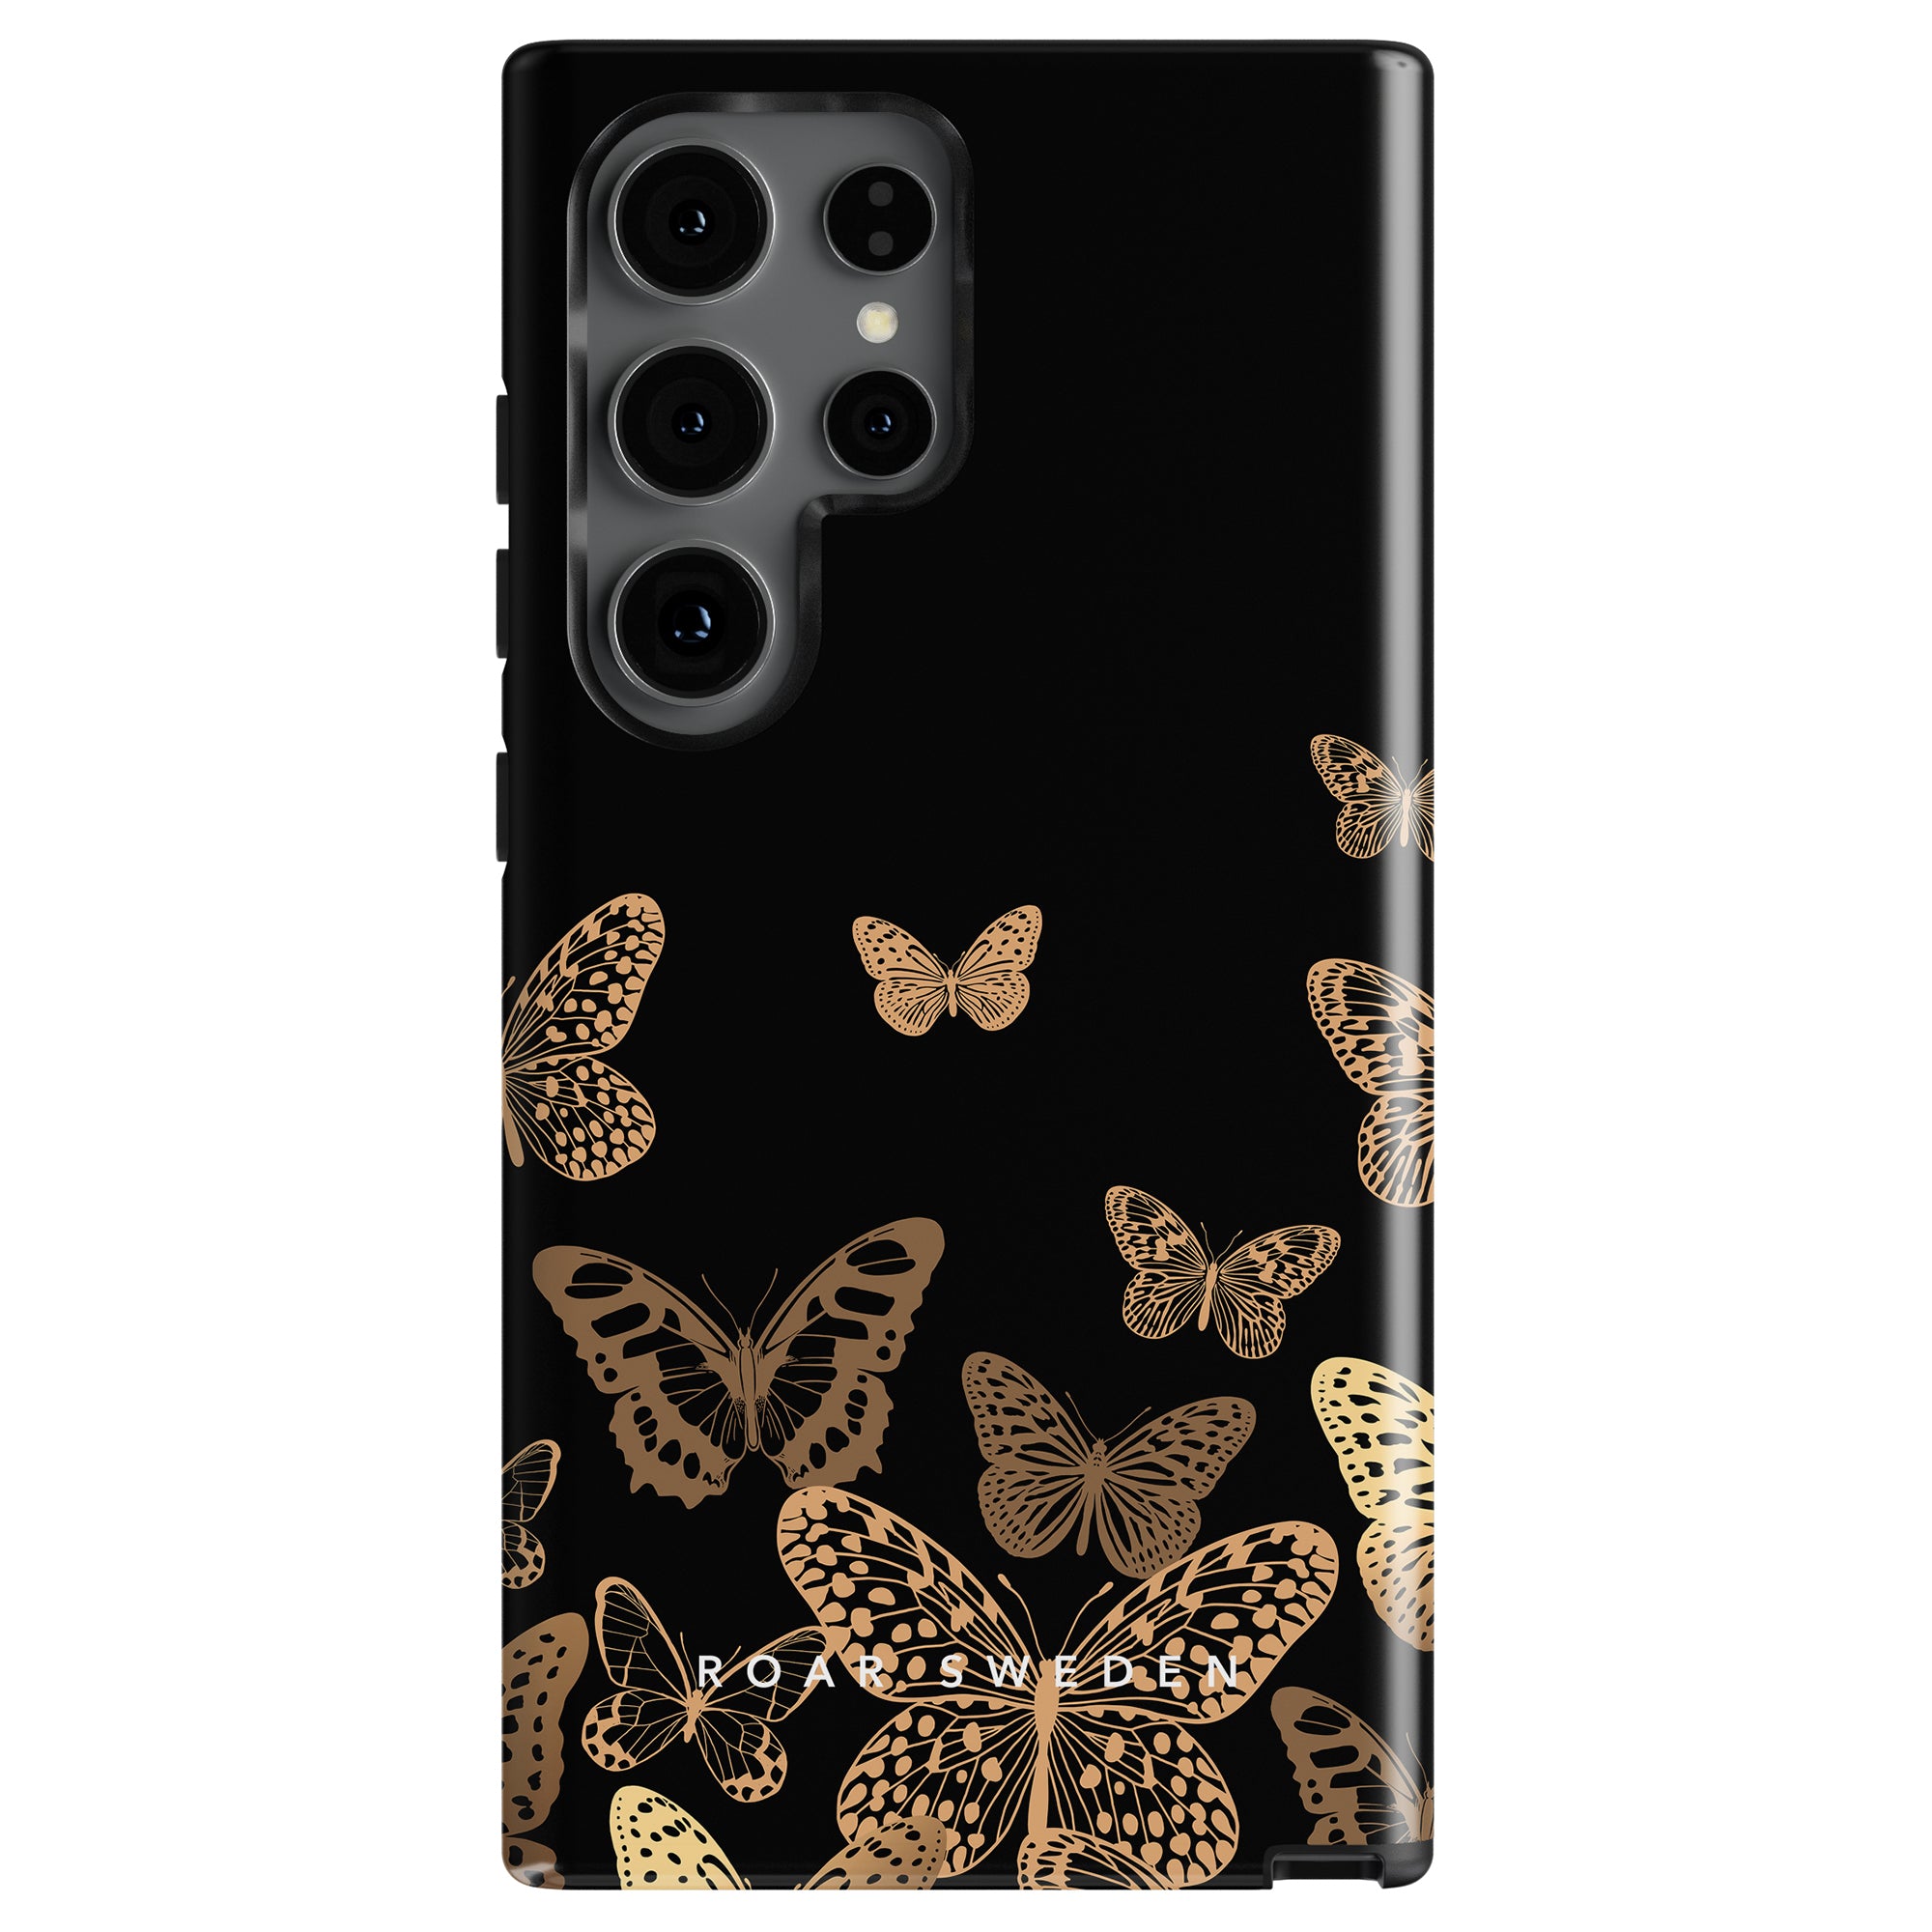 A black phone case with a pattern of golden butterflies, known as the Golden Butterflies - Tough Case. This exklusiv design is perfect for a phone with a multi-camera setup. The text "ROAR OF SWEDEN" is visible at the bottom, emphasizing hållbarhet and style.